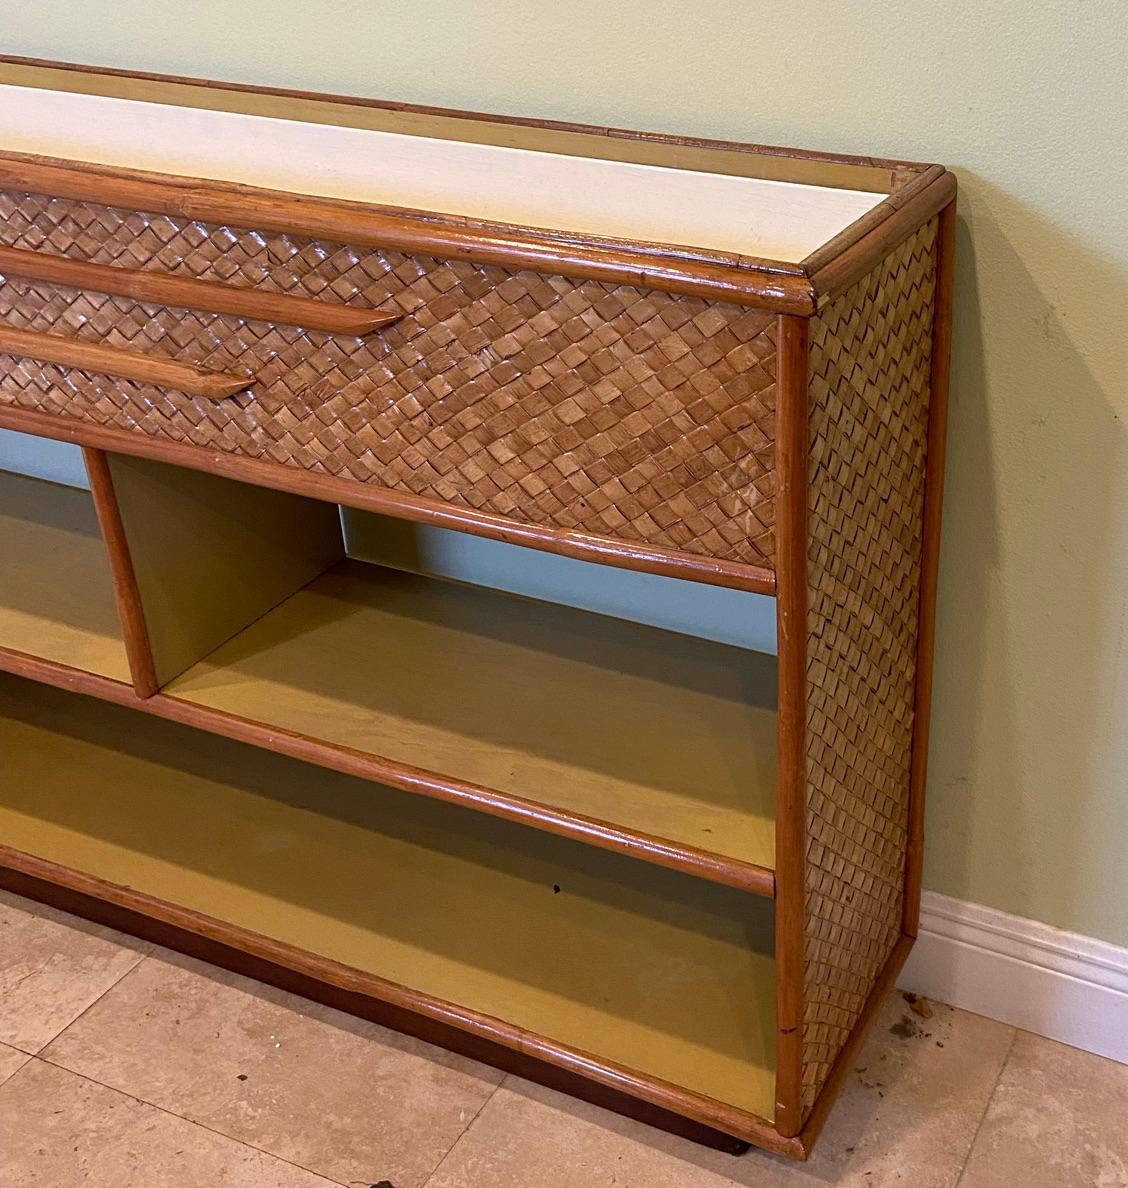 Vintage rattan shelving unit with a built in planter. Herringbone decoration on this very versable cabinet. Can be used in the kitchen to display China, in a sun room as an accent piece. The planter can be turned upside down to make it even with the